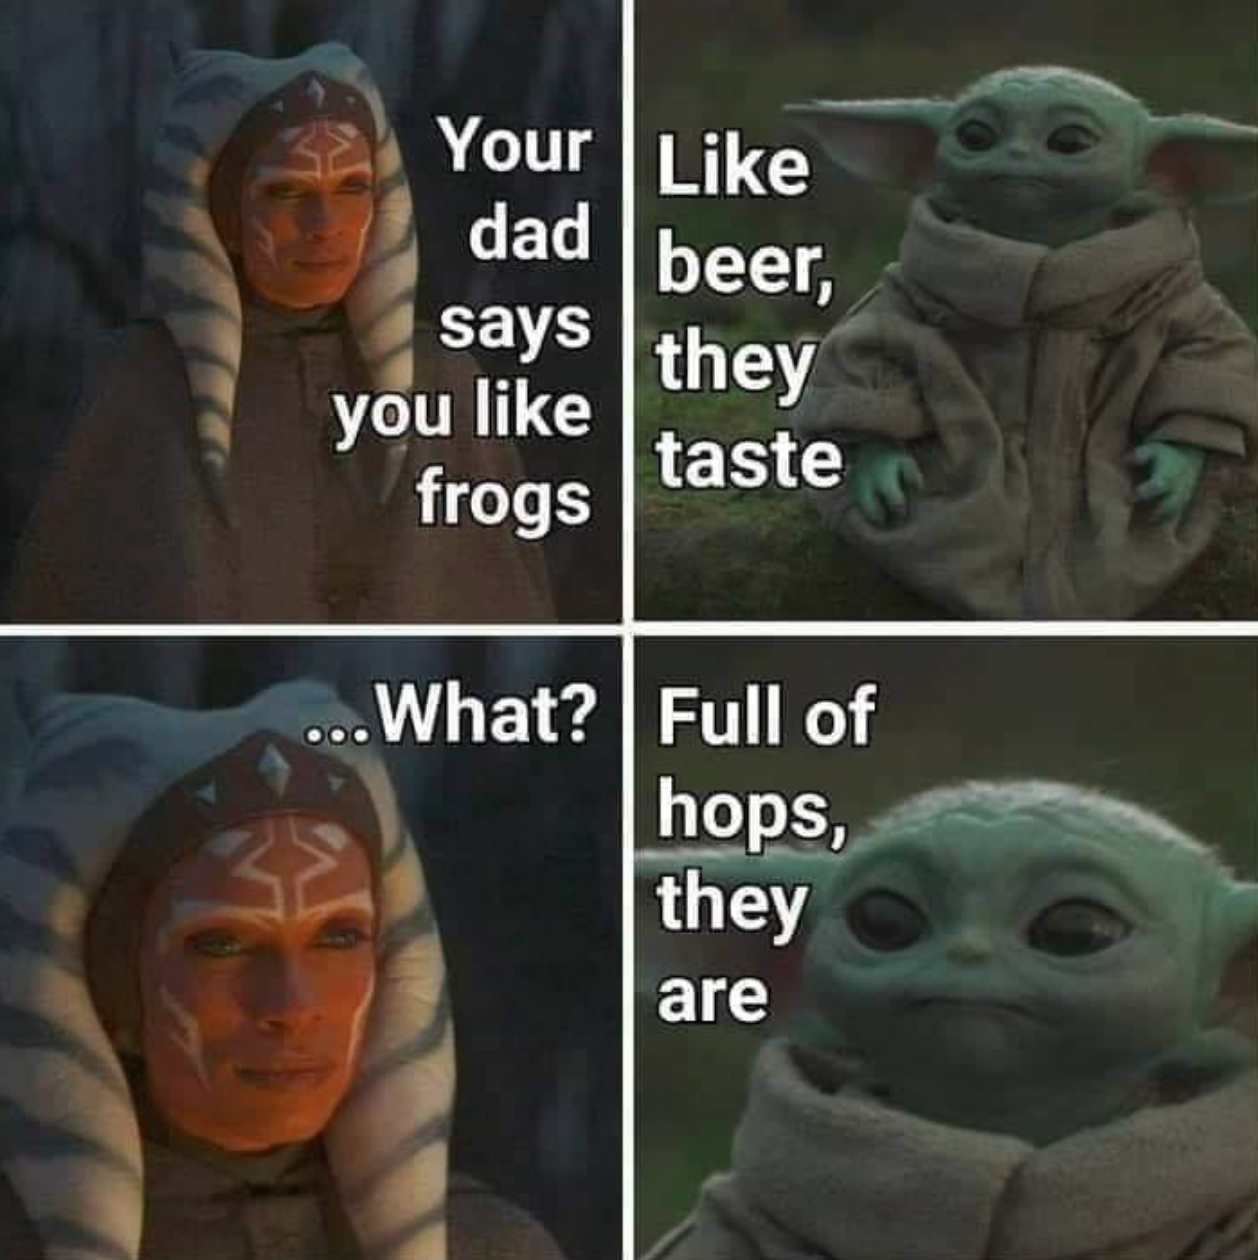 mandalorian chapter 13 - Your dad says beer, they taste you frogs ...What? Full of hops, they are